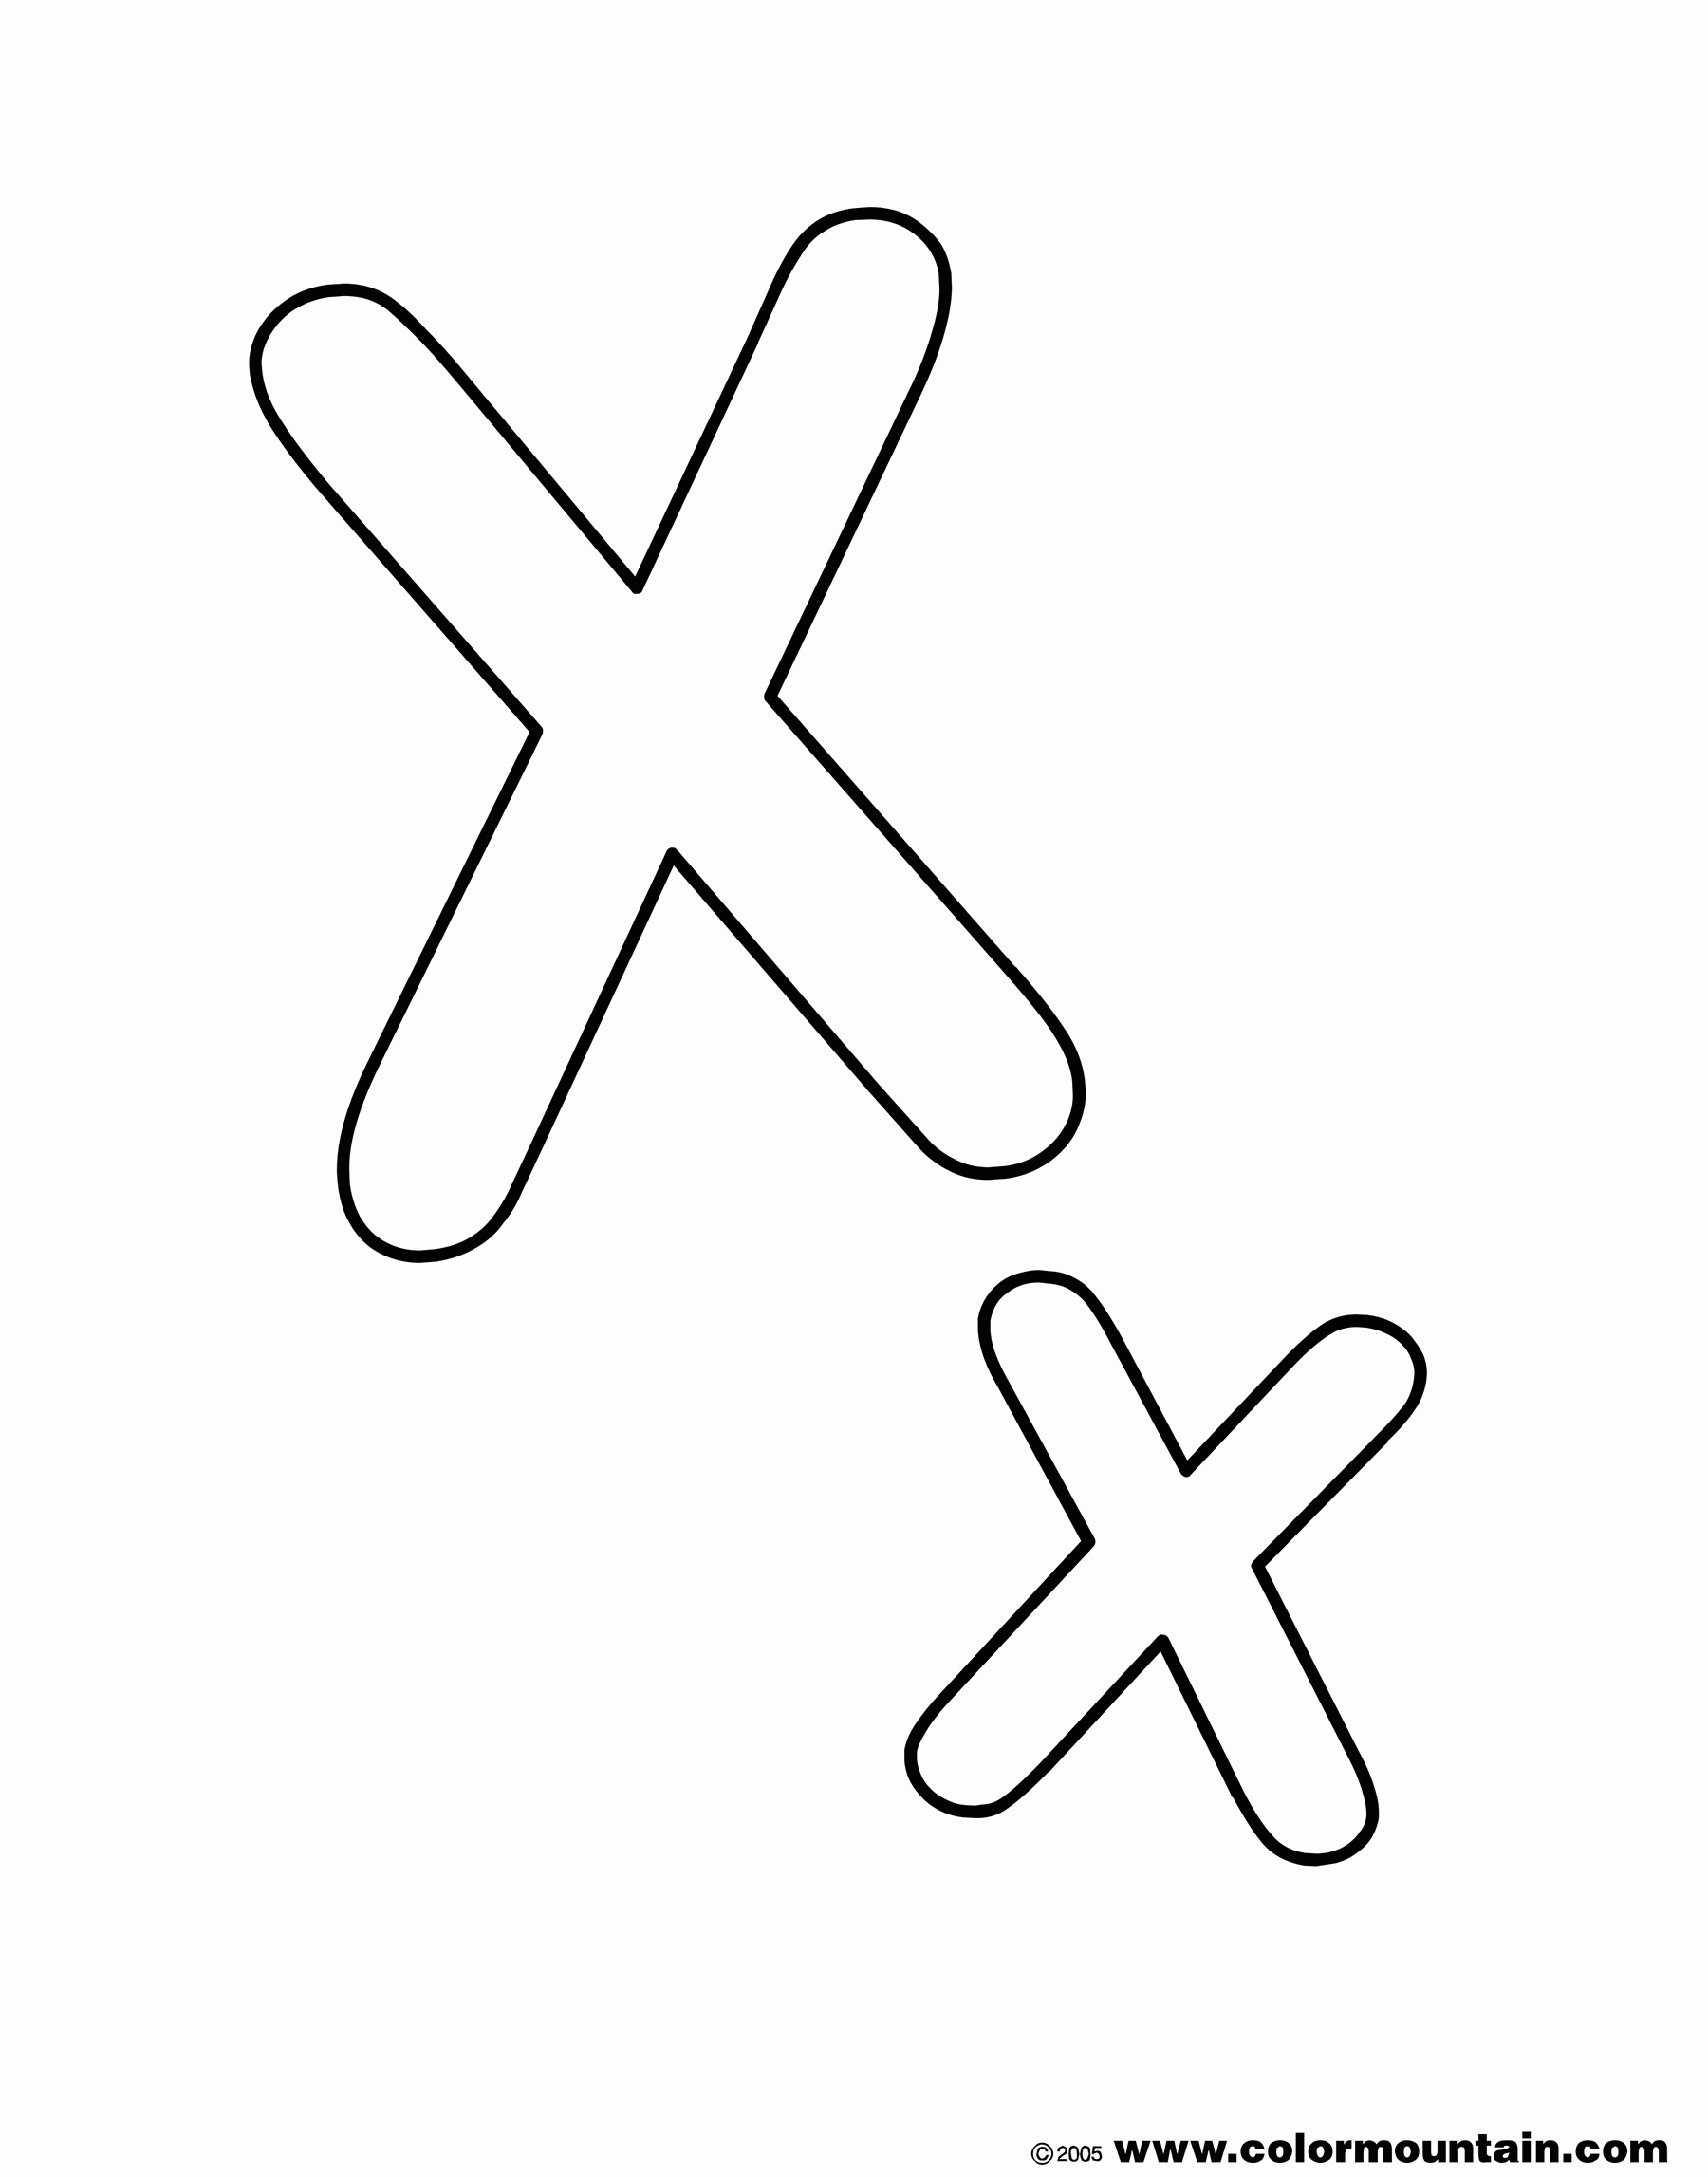 The Letter X Coloring page - Create A Printout Or Activity